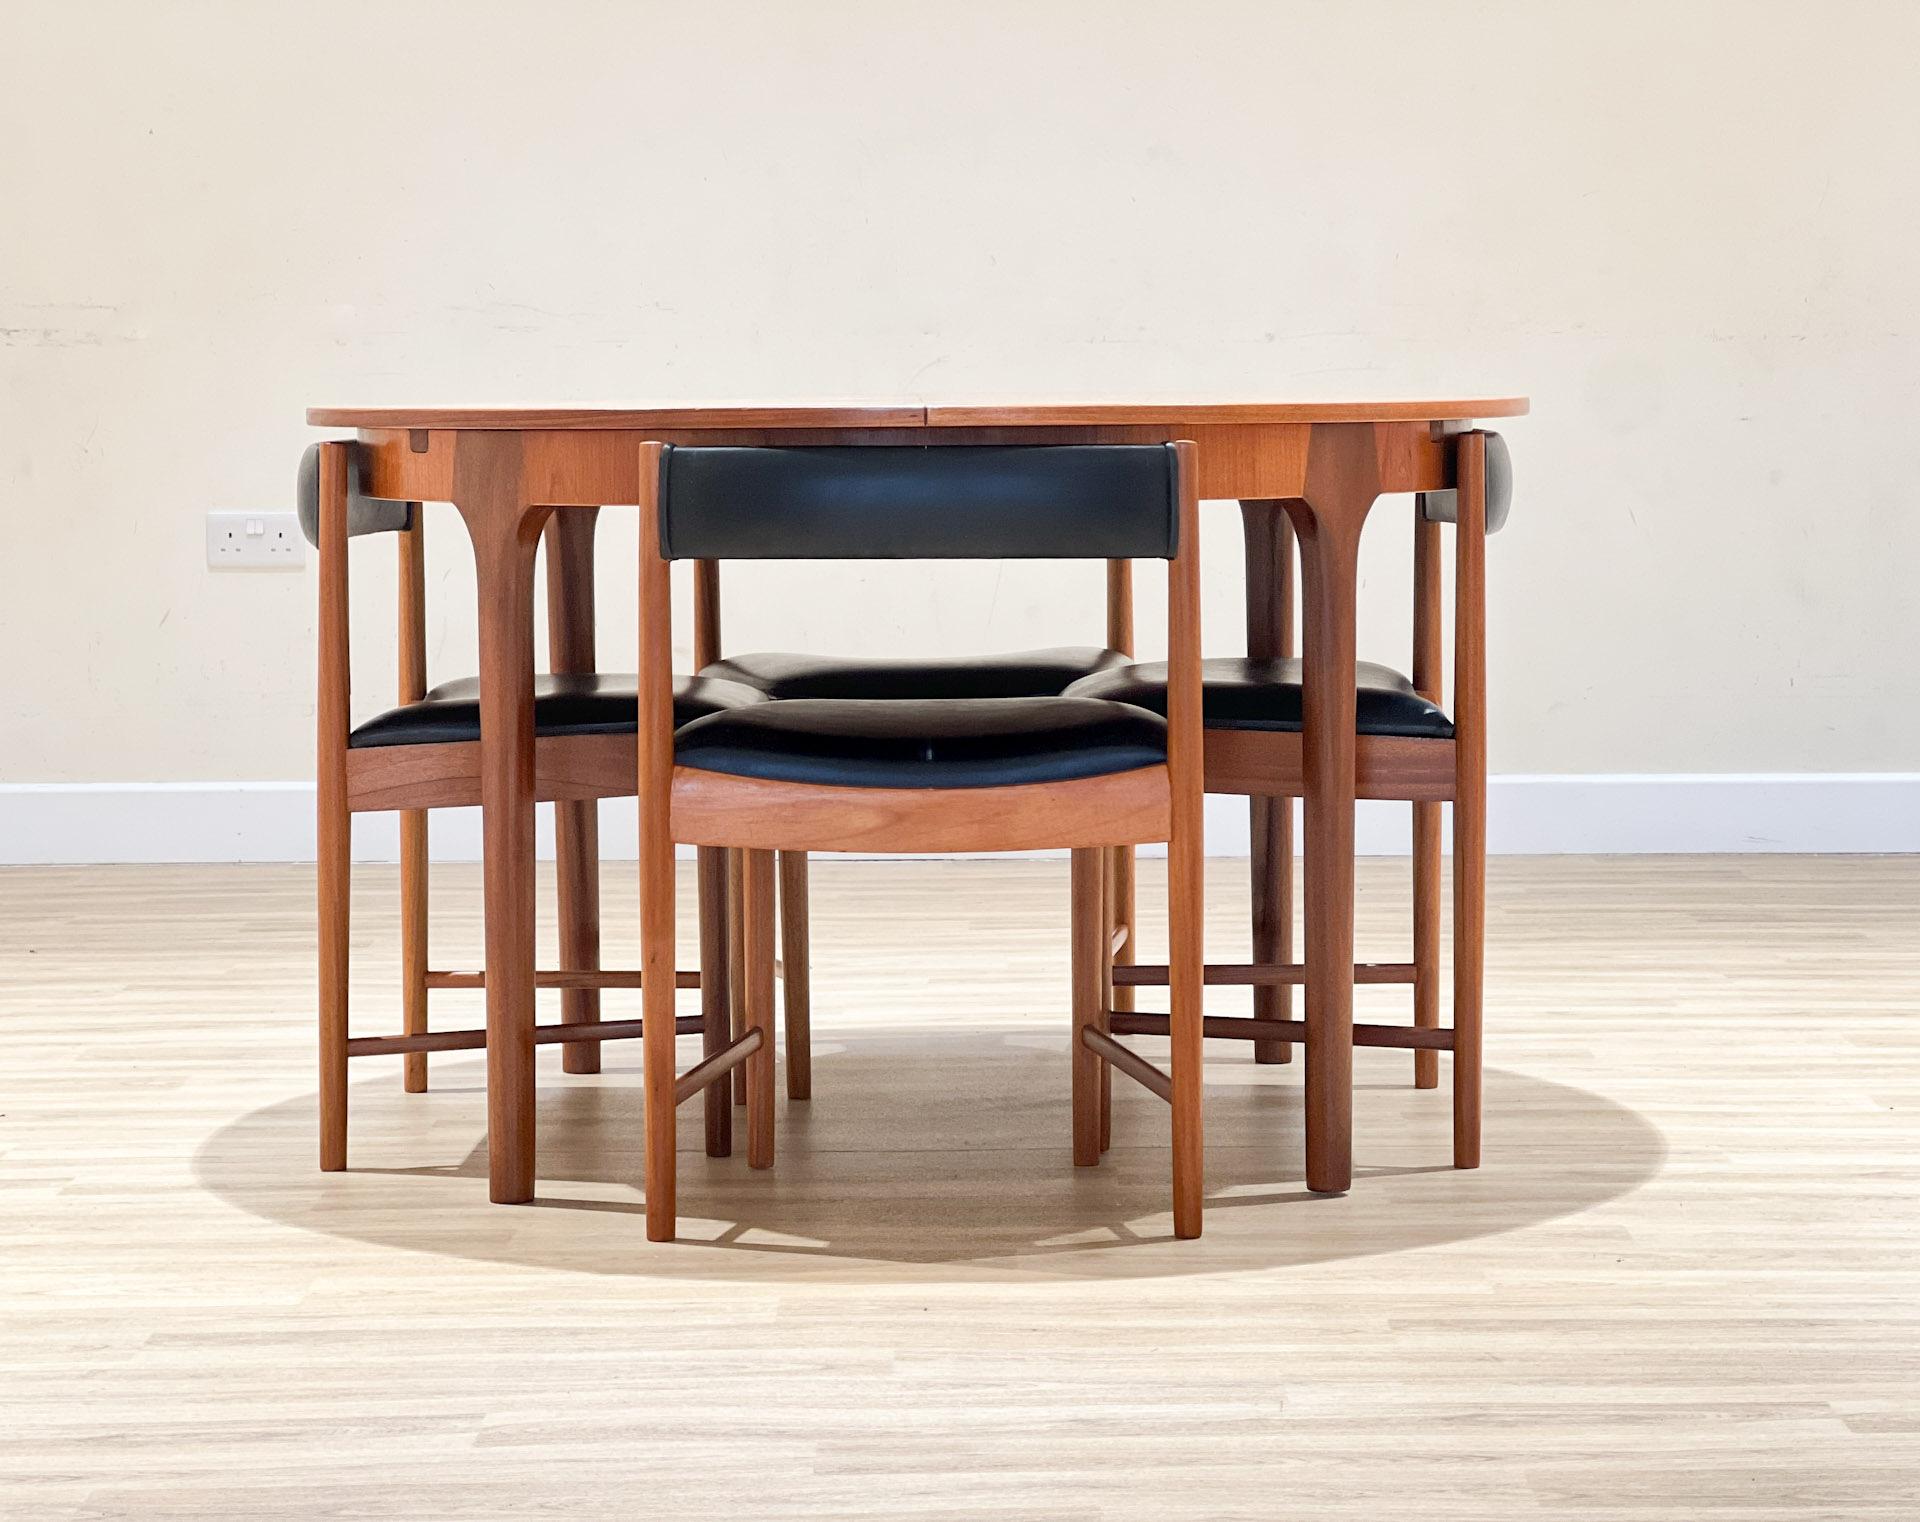 Set of an extendable circular table and 4 chairs from the Scottish firm A.H. McIntosh & Co., created by Tom Robertson.


This set was designed in the 70s. The table (model T21) is constructed with solid teak legs and teak veneered tabletop.

It